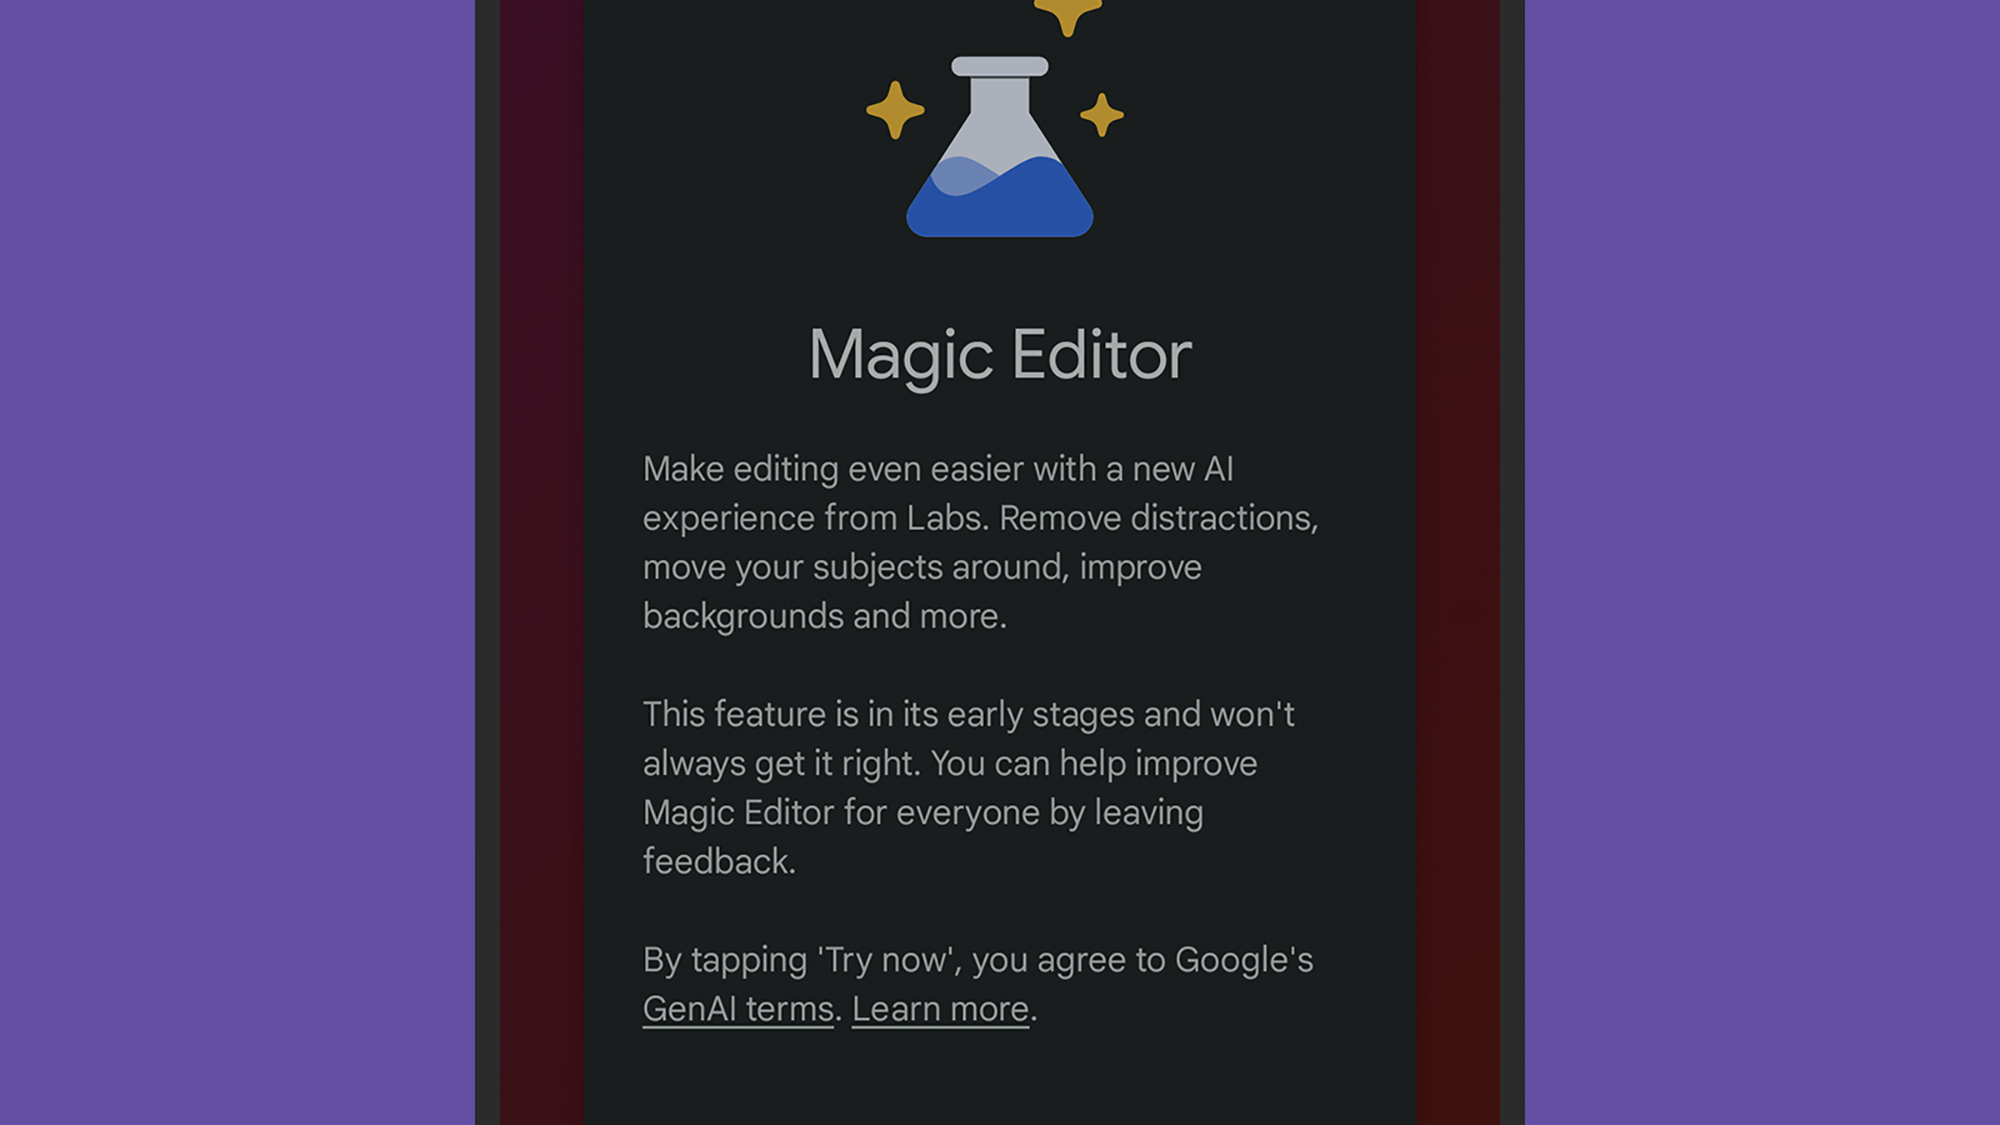 The Magic Editor is rolling out to selected Pixel phones now. Credit: David Nield